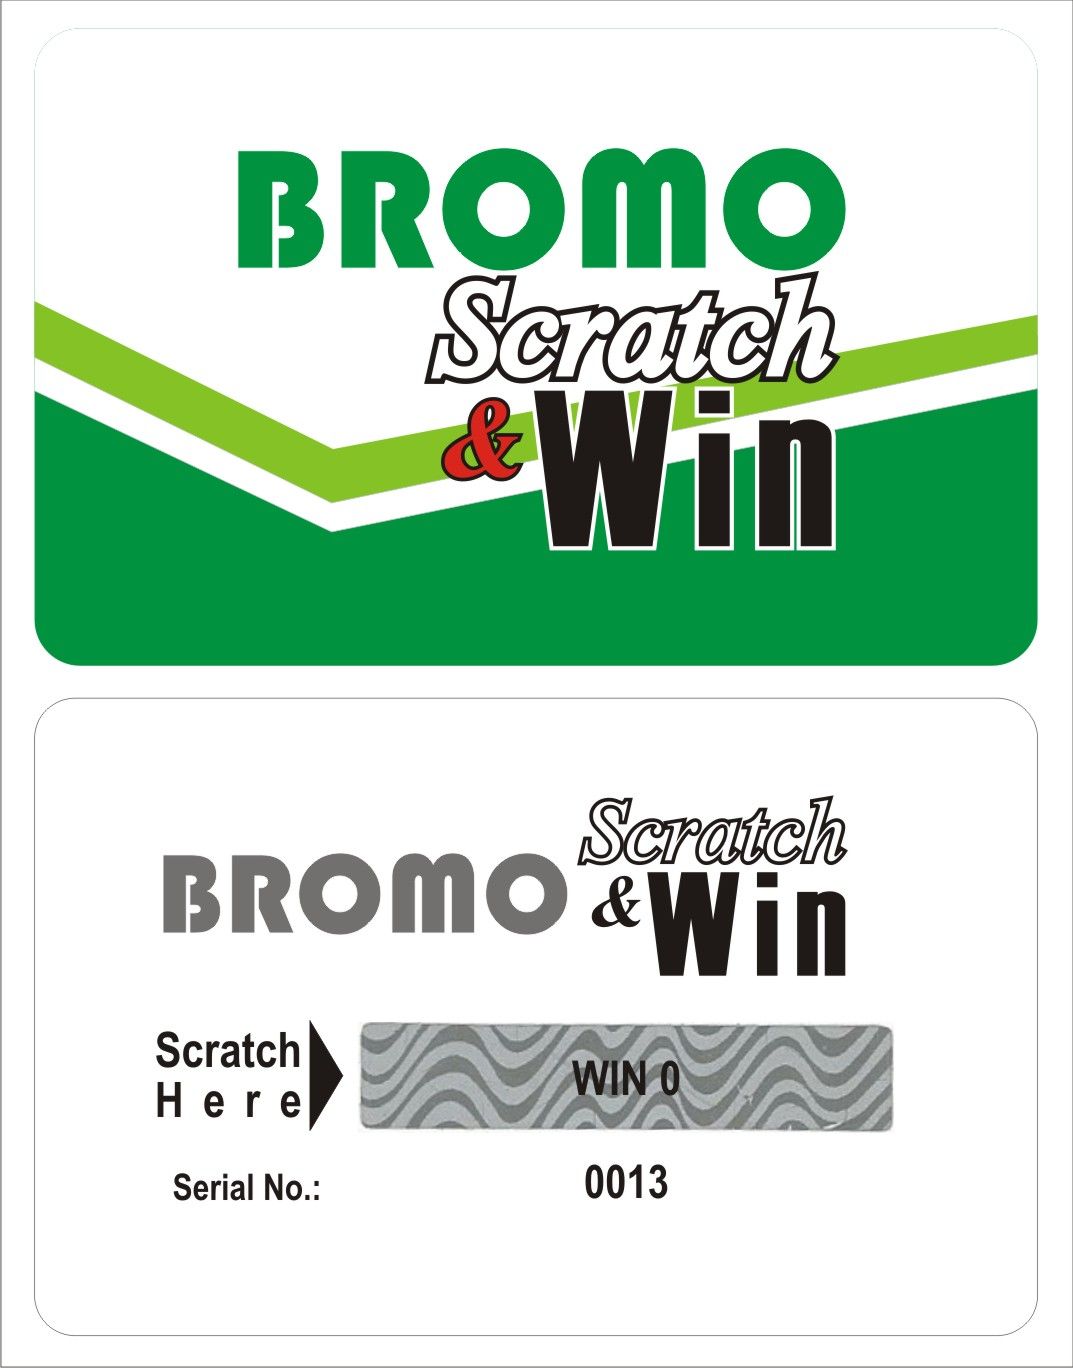 CALL EMMANUEL ON 08176499649 TO PRINT PROMO SCRATCH CARDS IN LAGOS NIGERIA